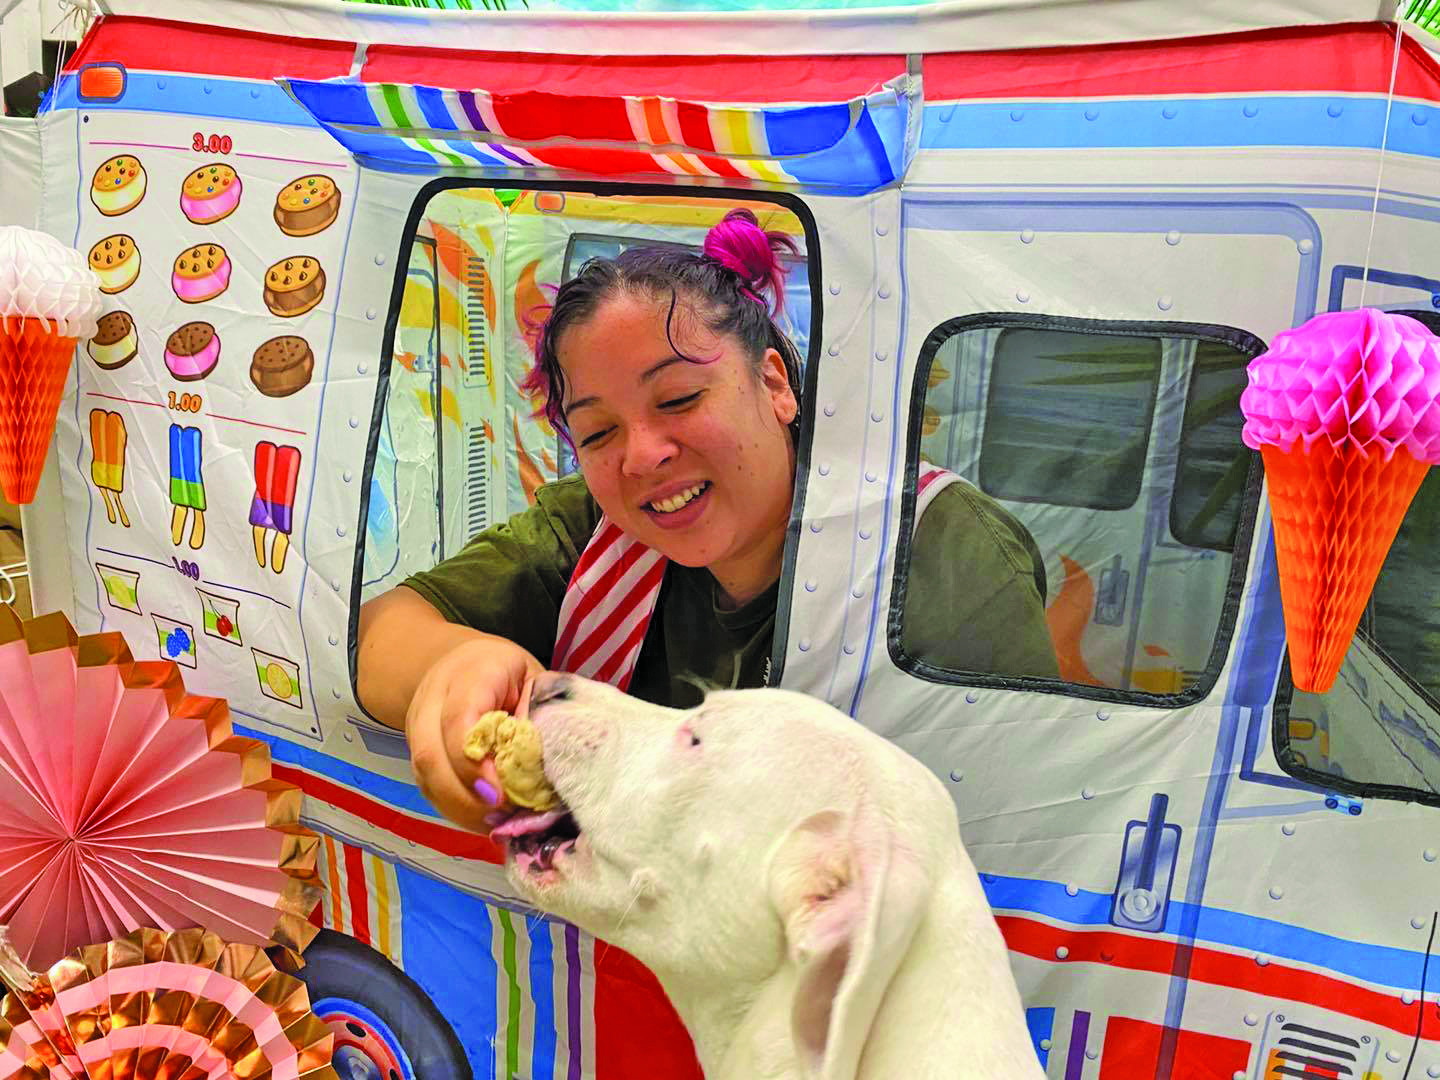 A dog gets a sweet treat at the Doggies Ice Cream Social.